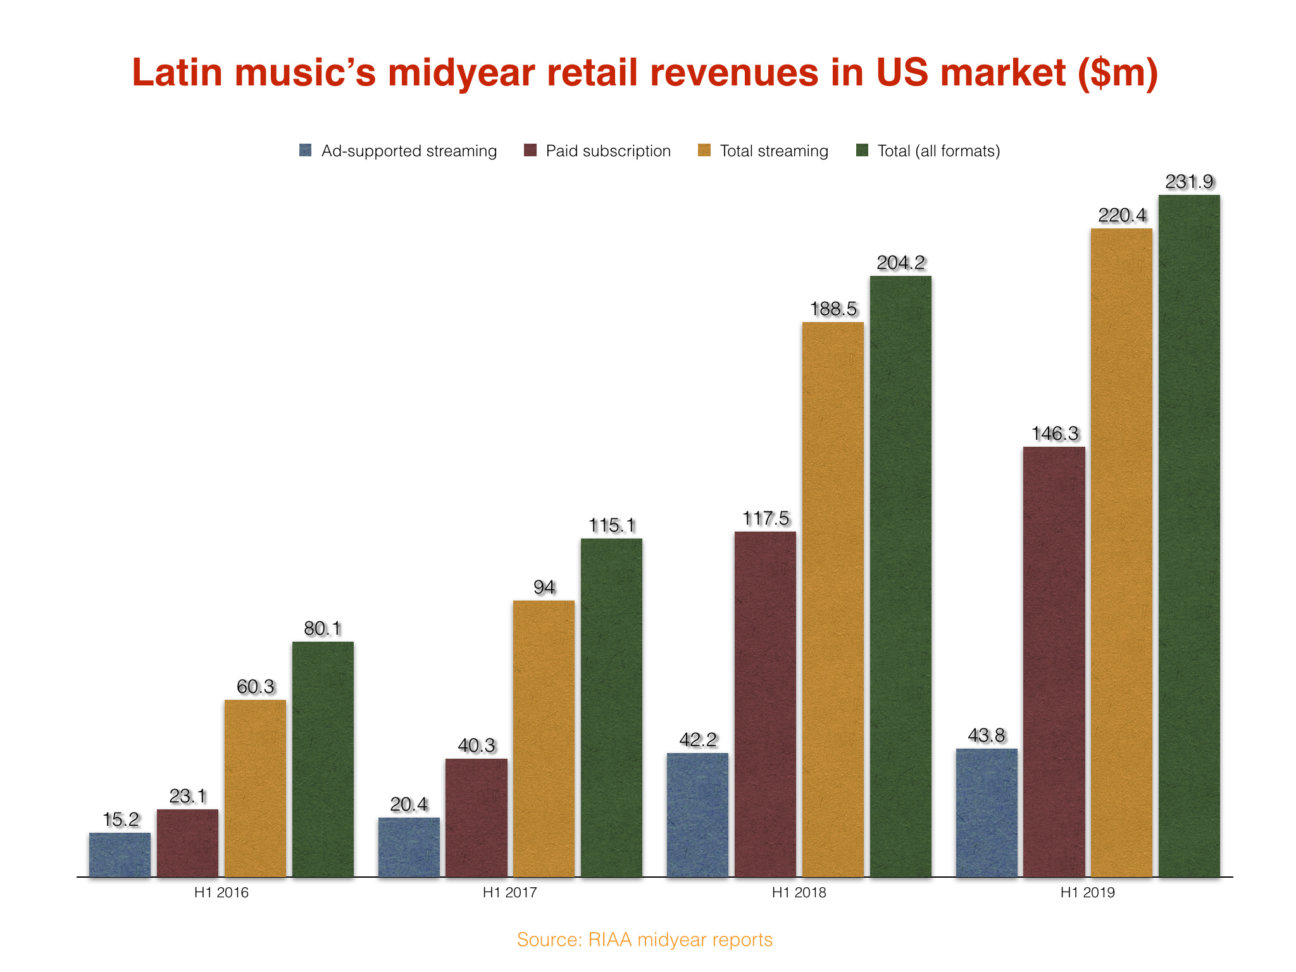 Latin music will generate close to 500m from streaming in the US this